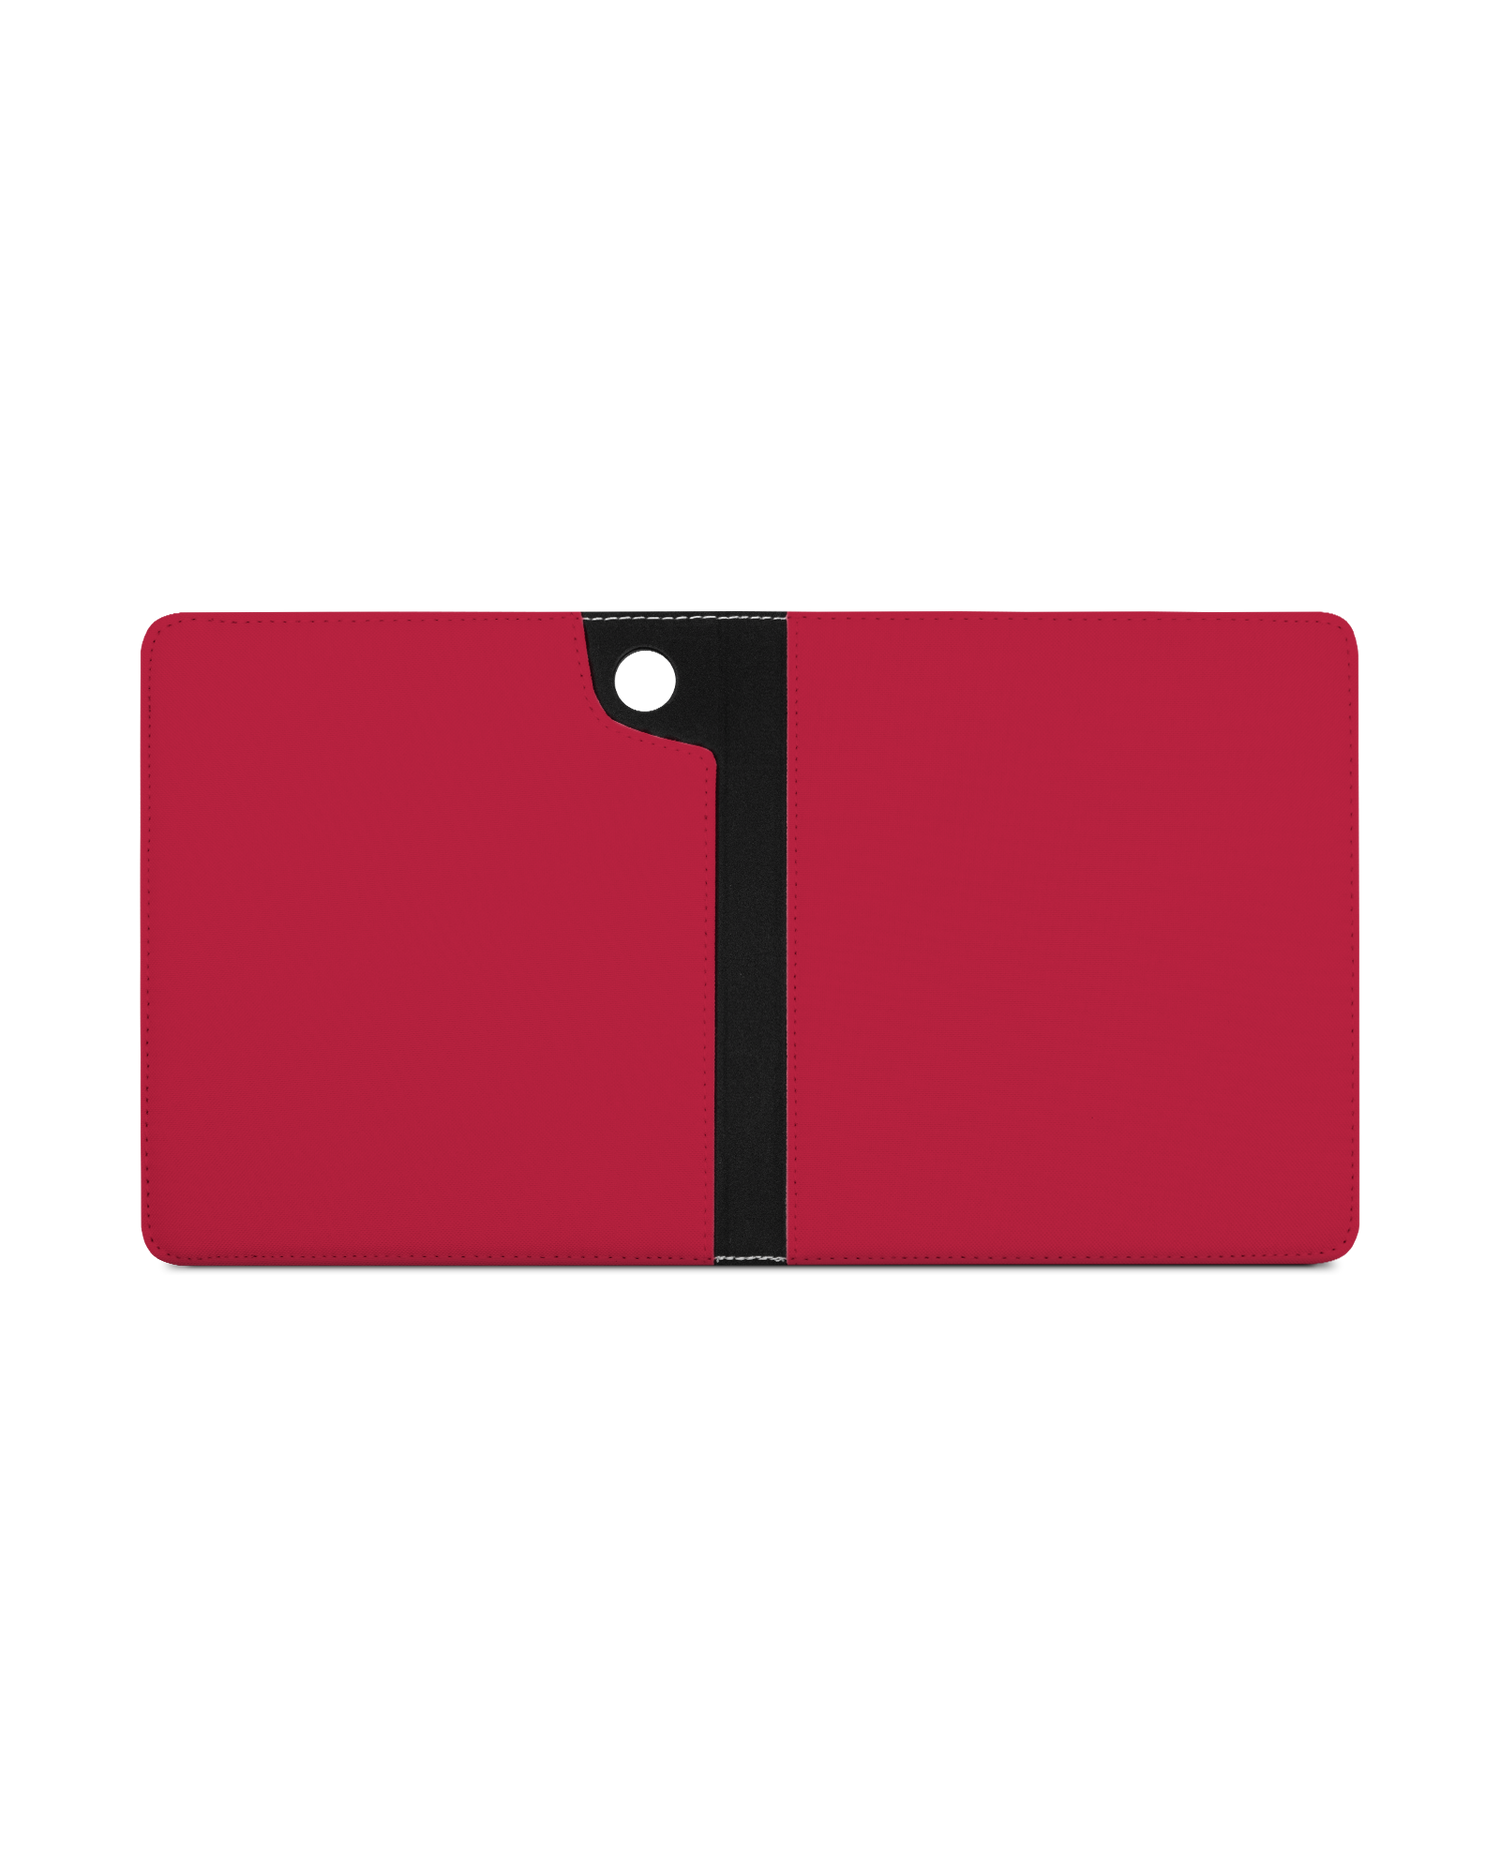 RED eReader Case for tolino epos 3 (2022): Opened exterior view